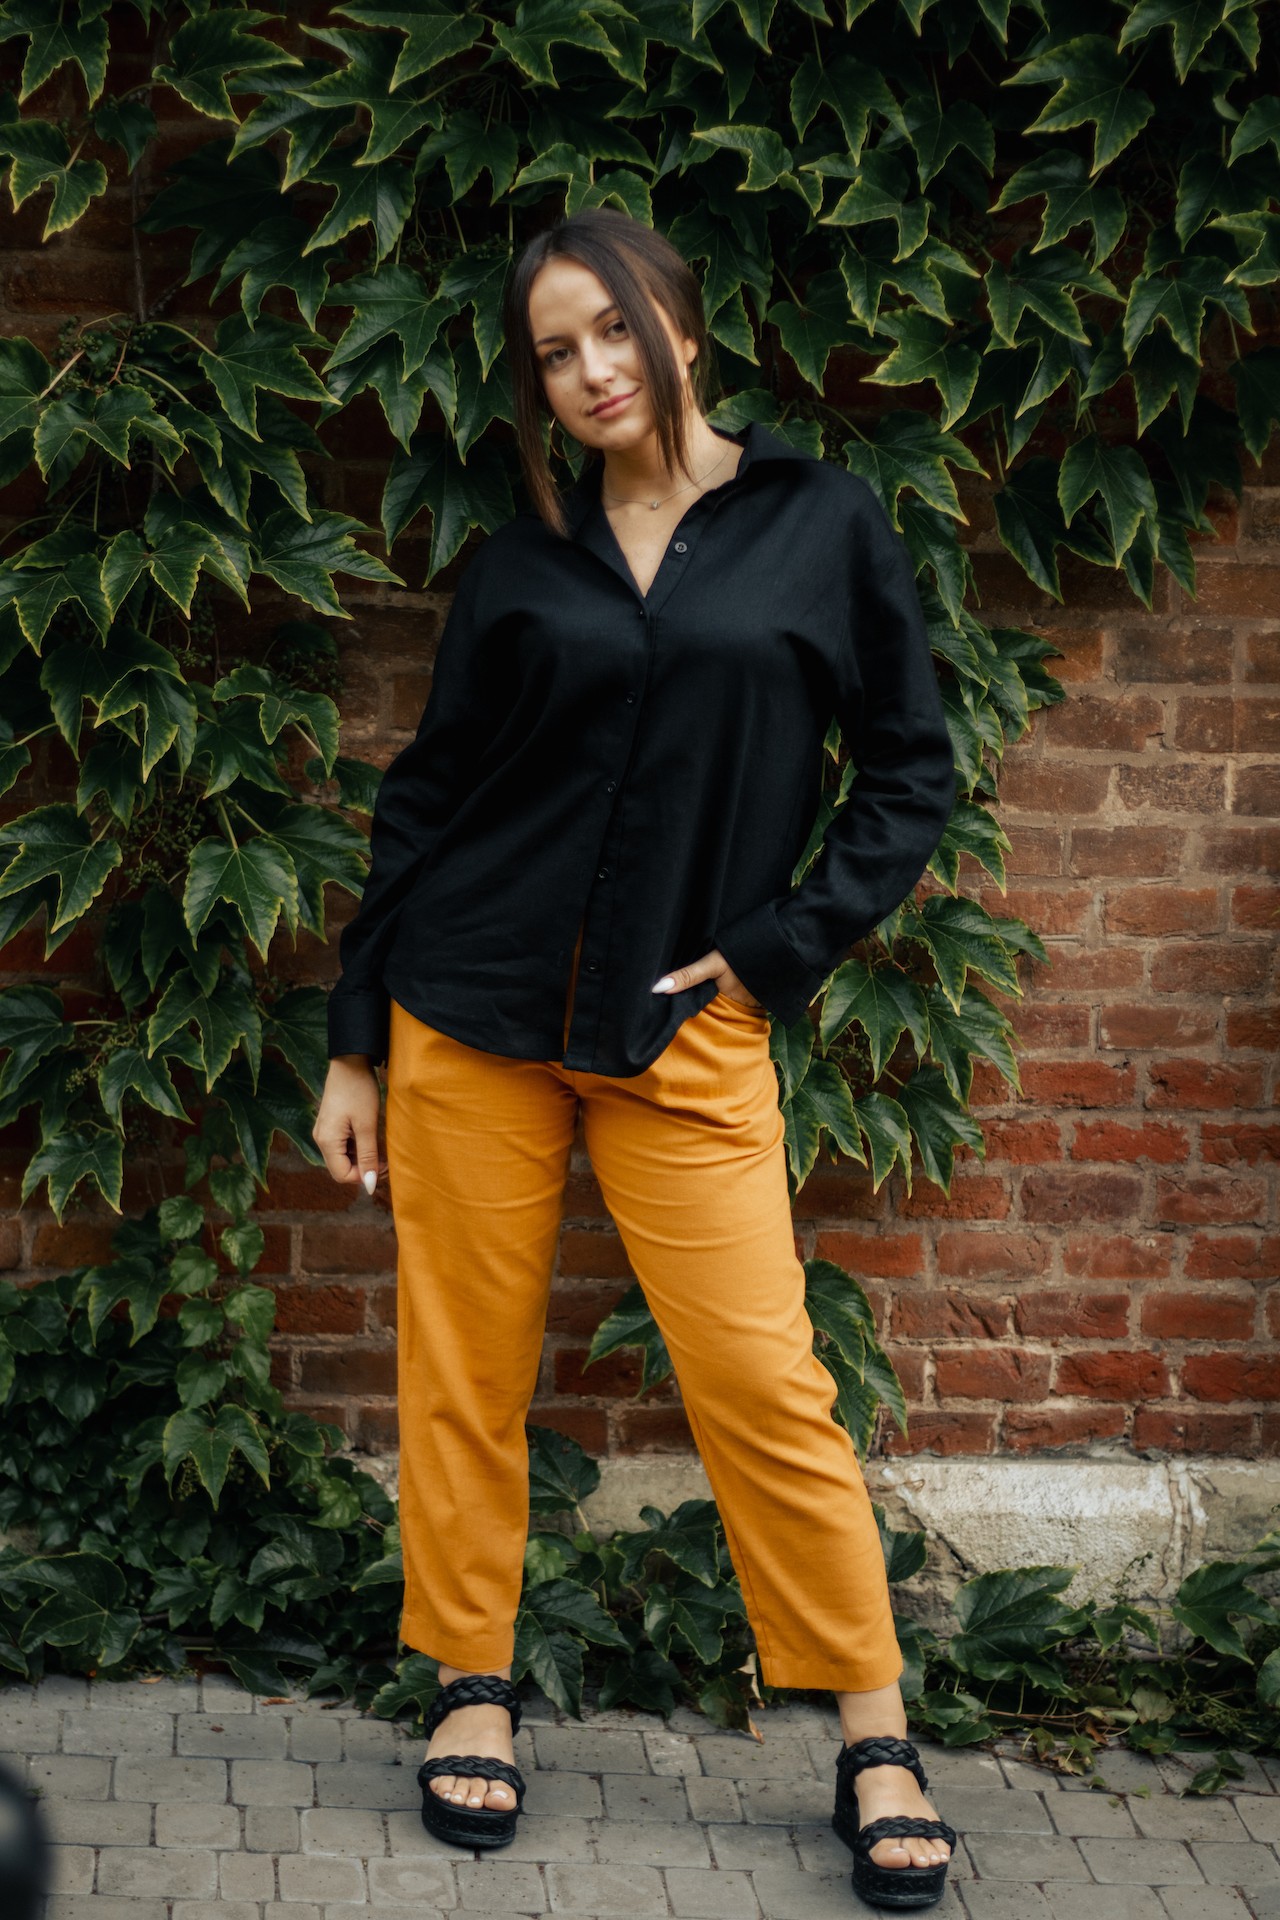 A set of a long shirt and classic pants